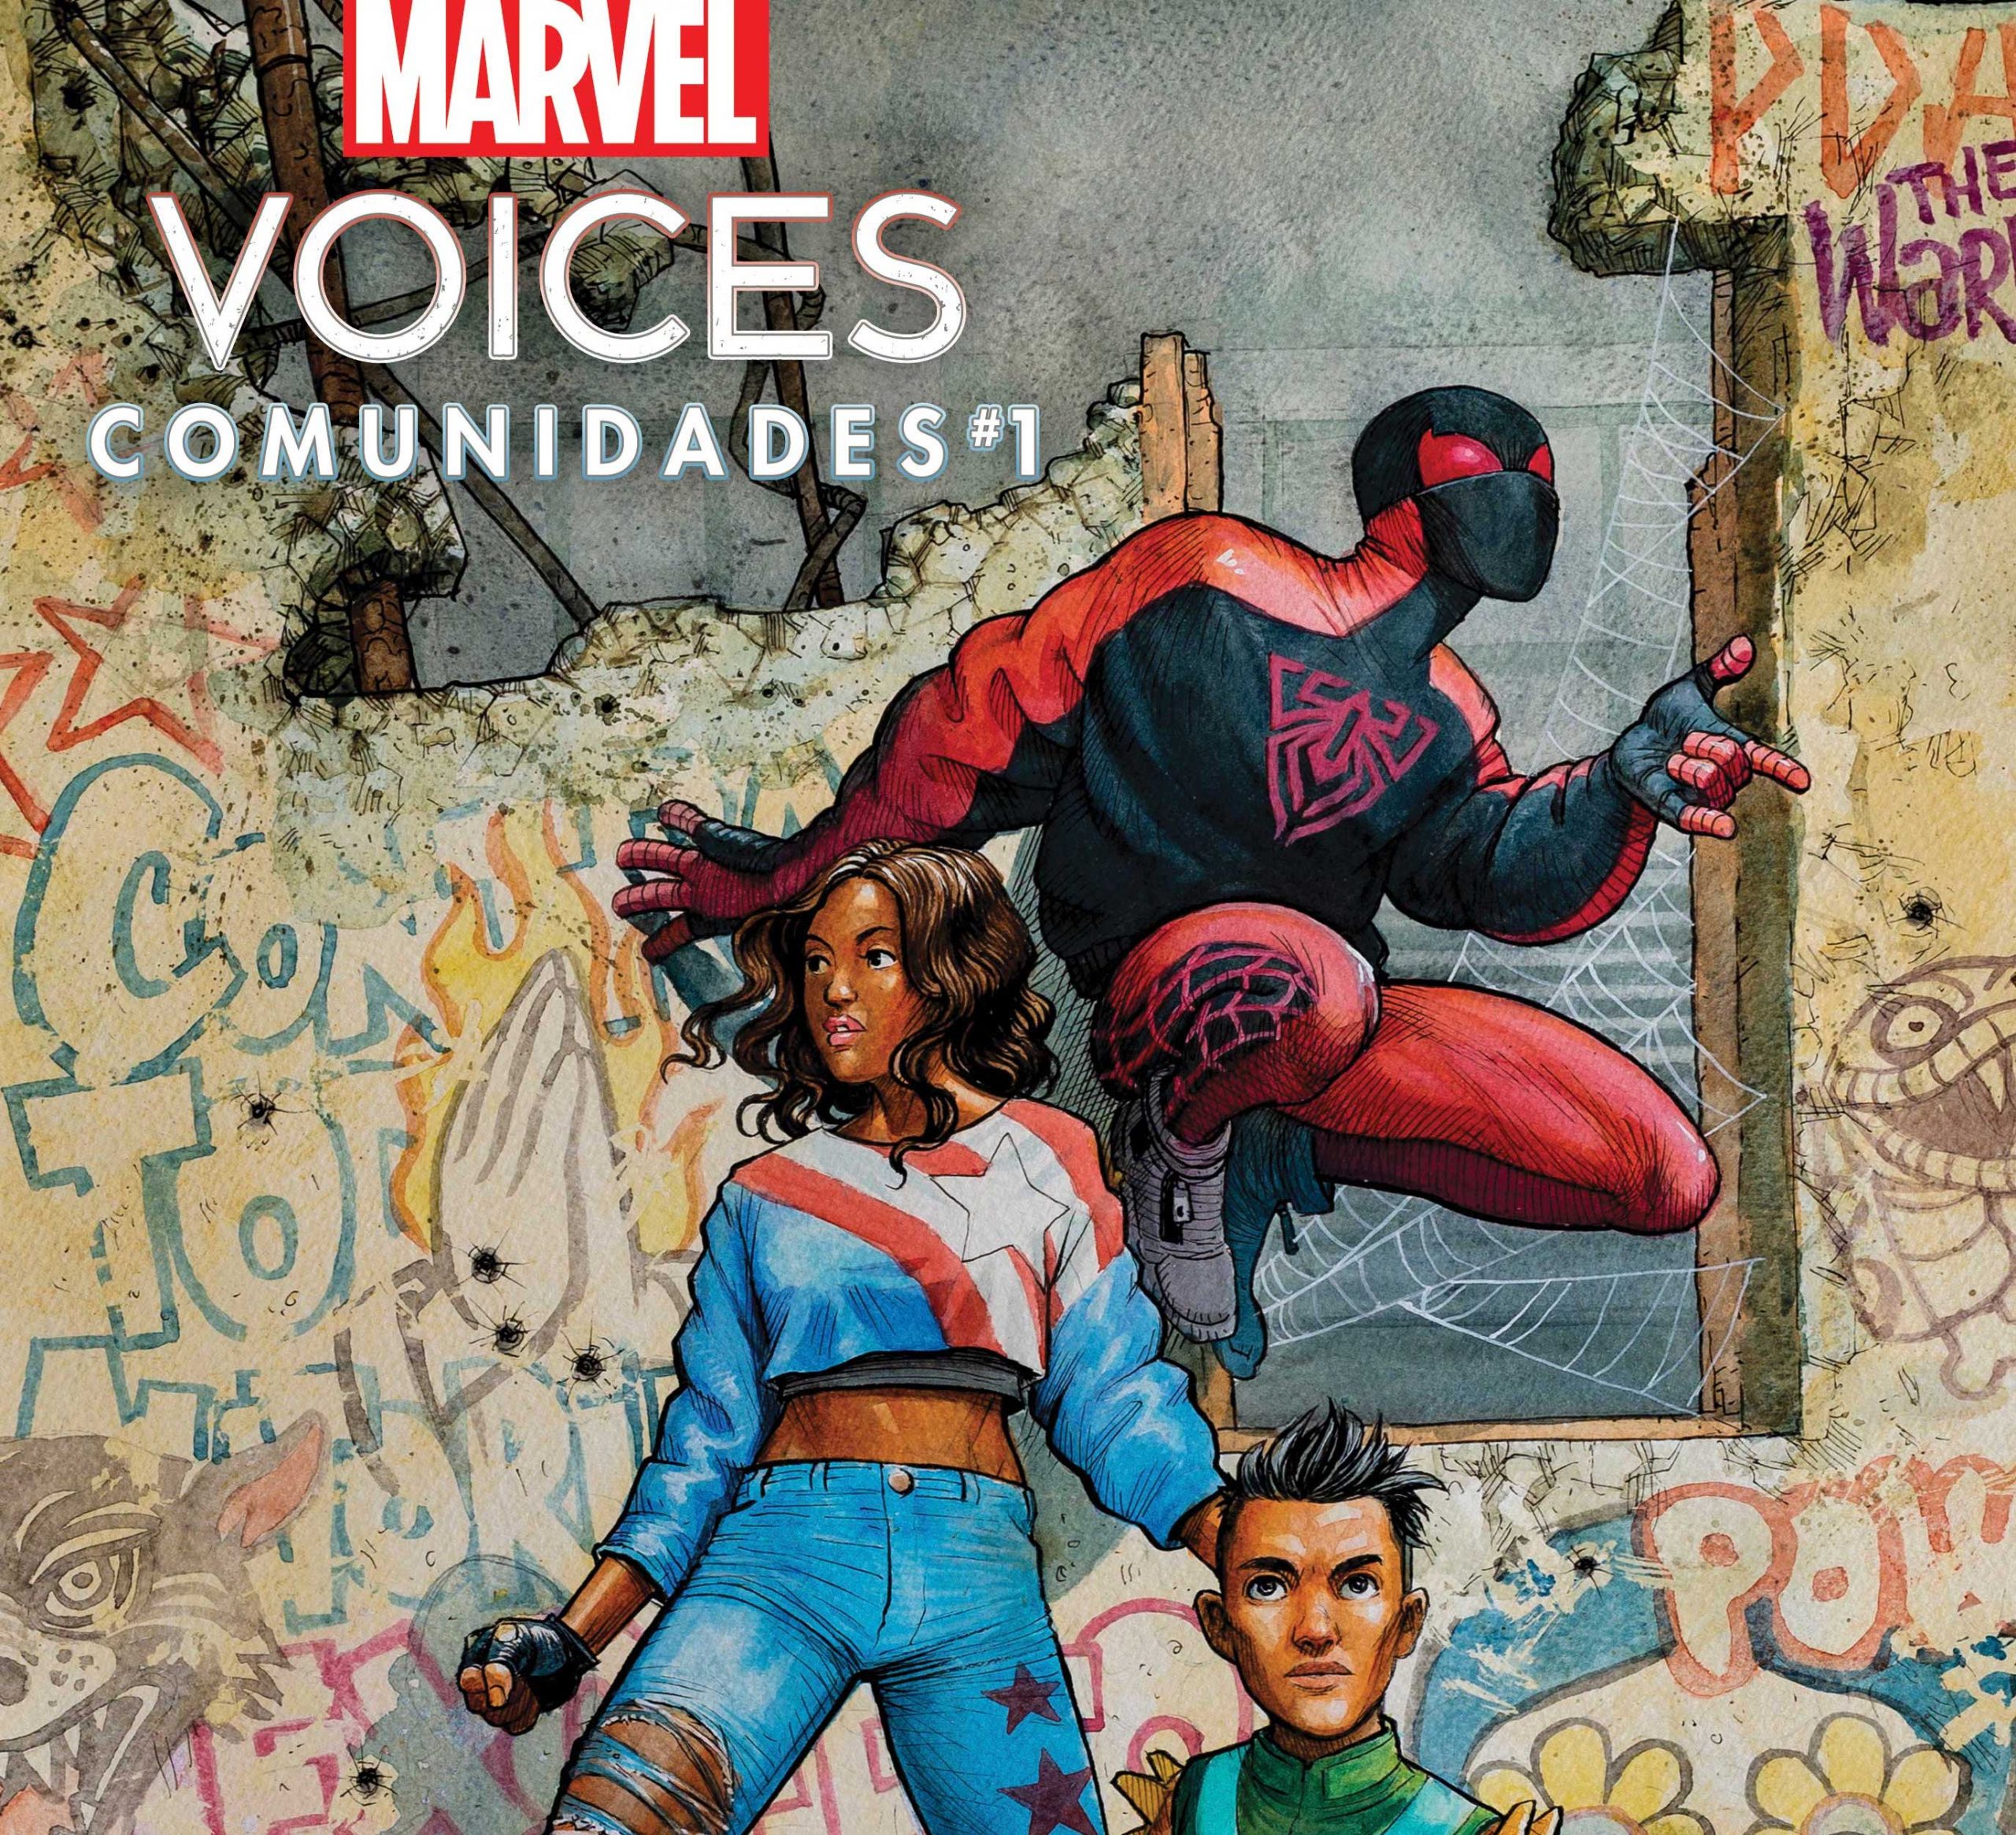 Marvel First Look: Marvel's Voices: Comunidades #1